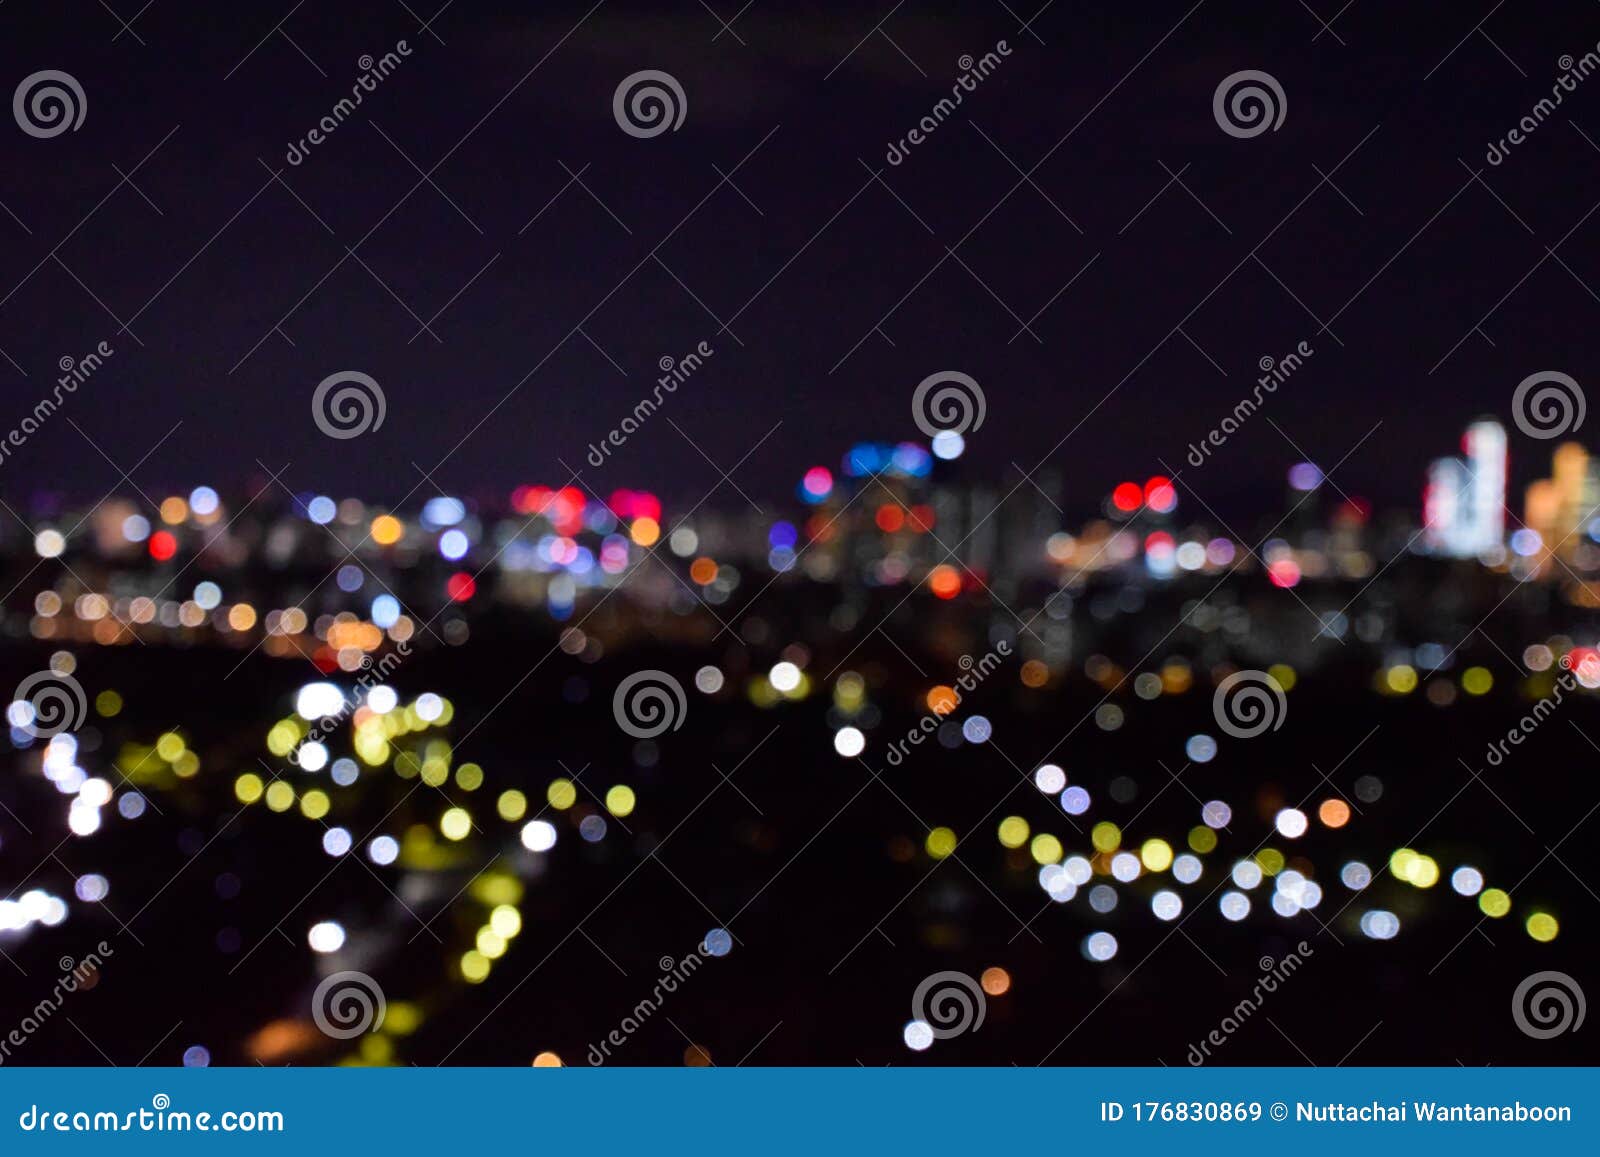 Bokeh Blurred City View In Seoul South Korea Landscape Blurred In Night Of Seoul Stock Image Image Of Journey Bridge 176830869